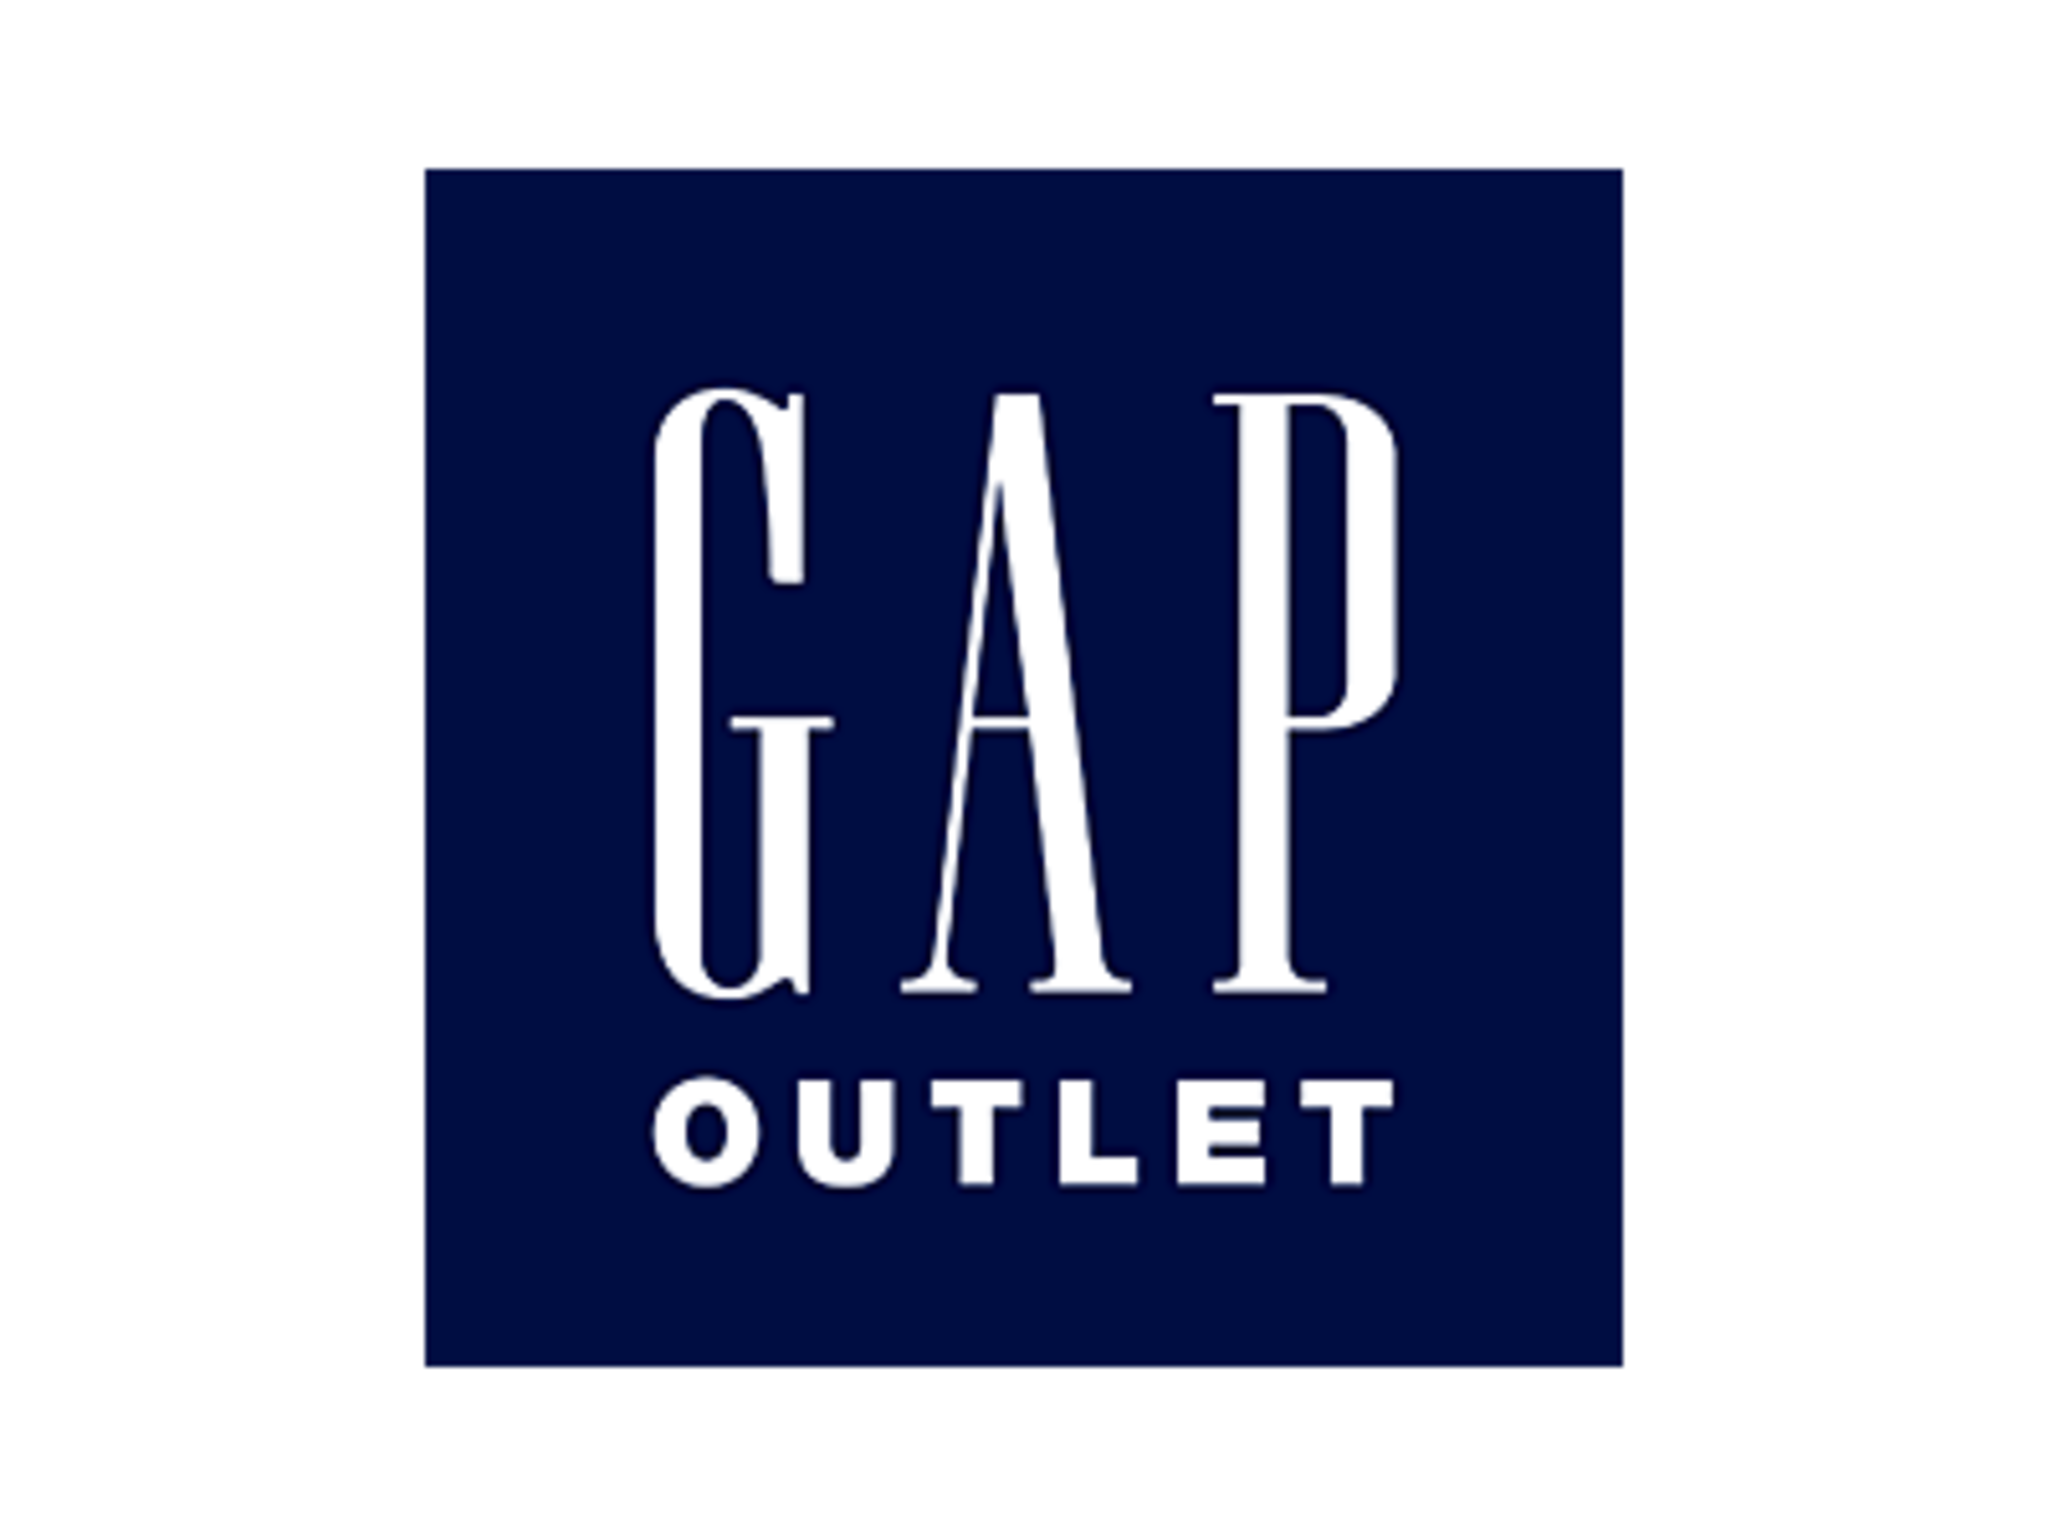 GAP Outlet 三井アウトレットパーク木更津店の代表写真9